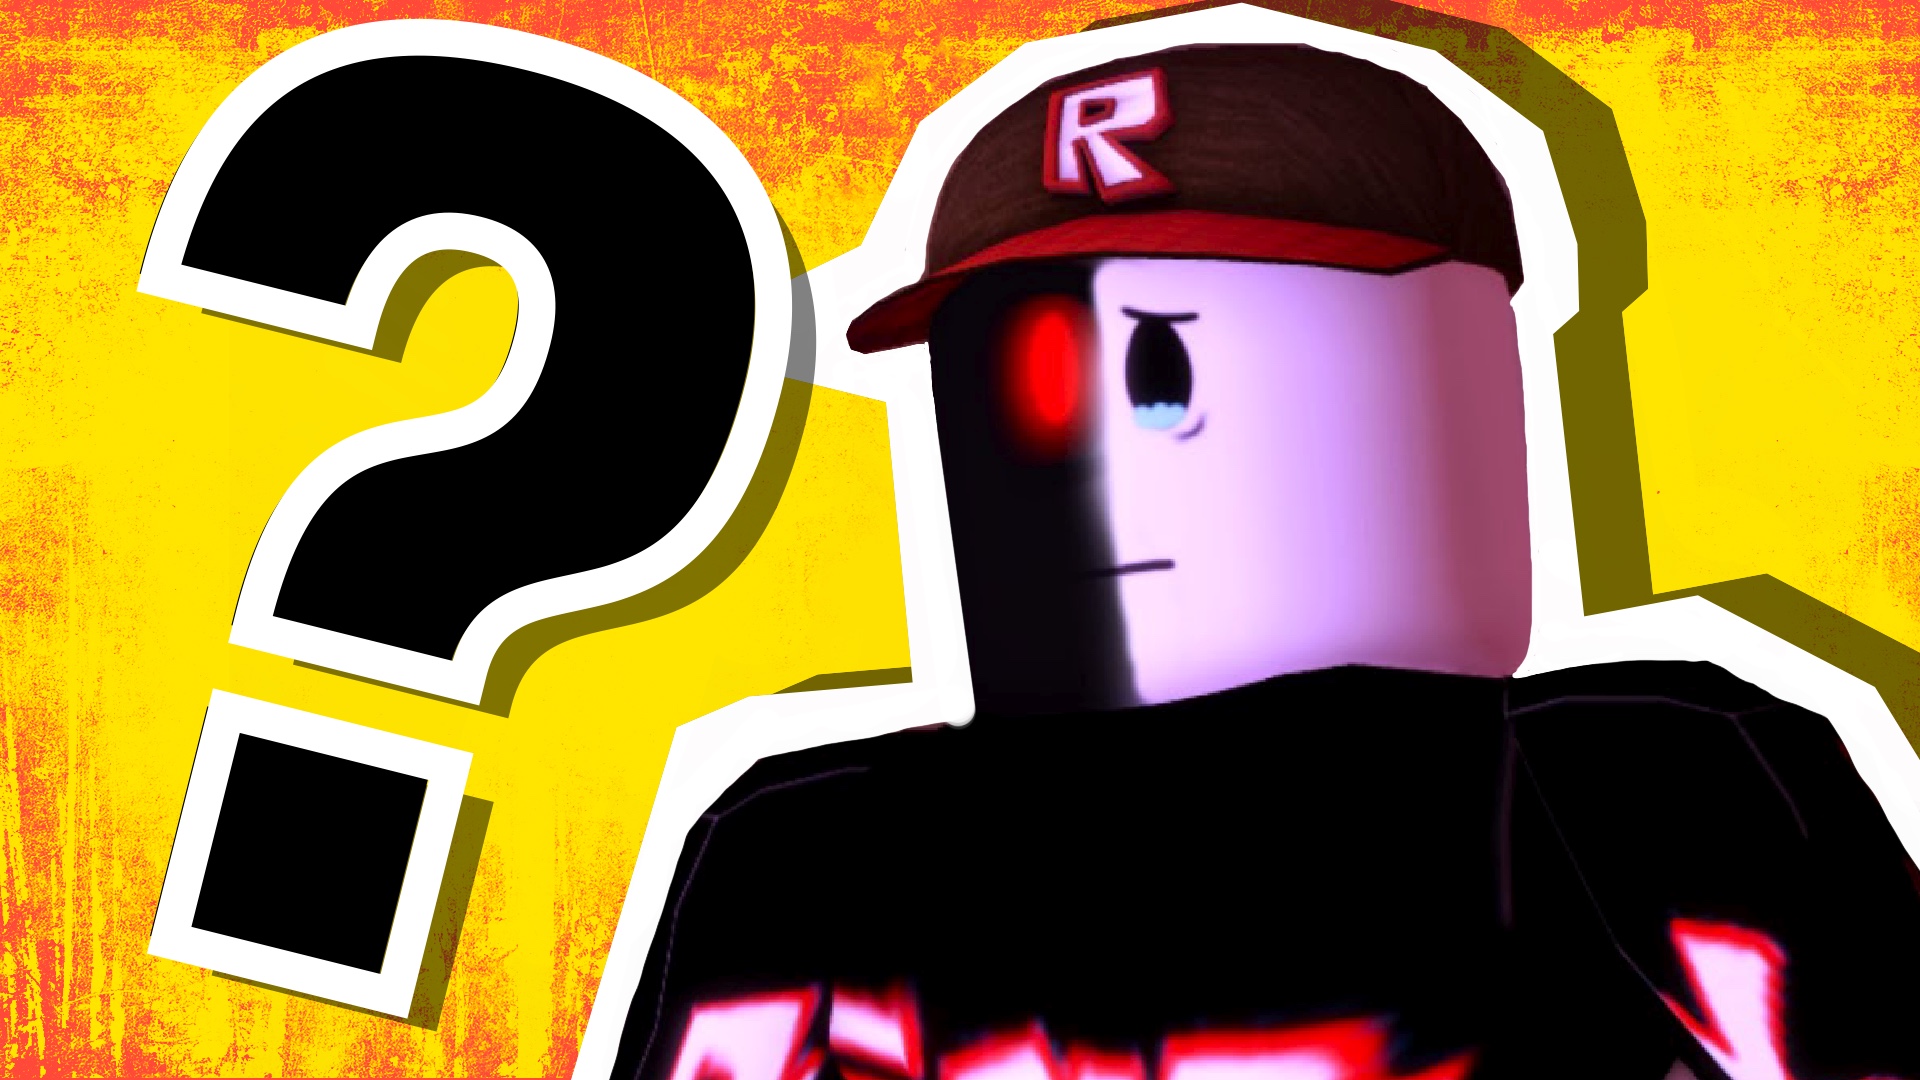 THE STORY OF GUEST 666 in ROBLOX! (SCARY) 